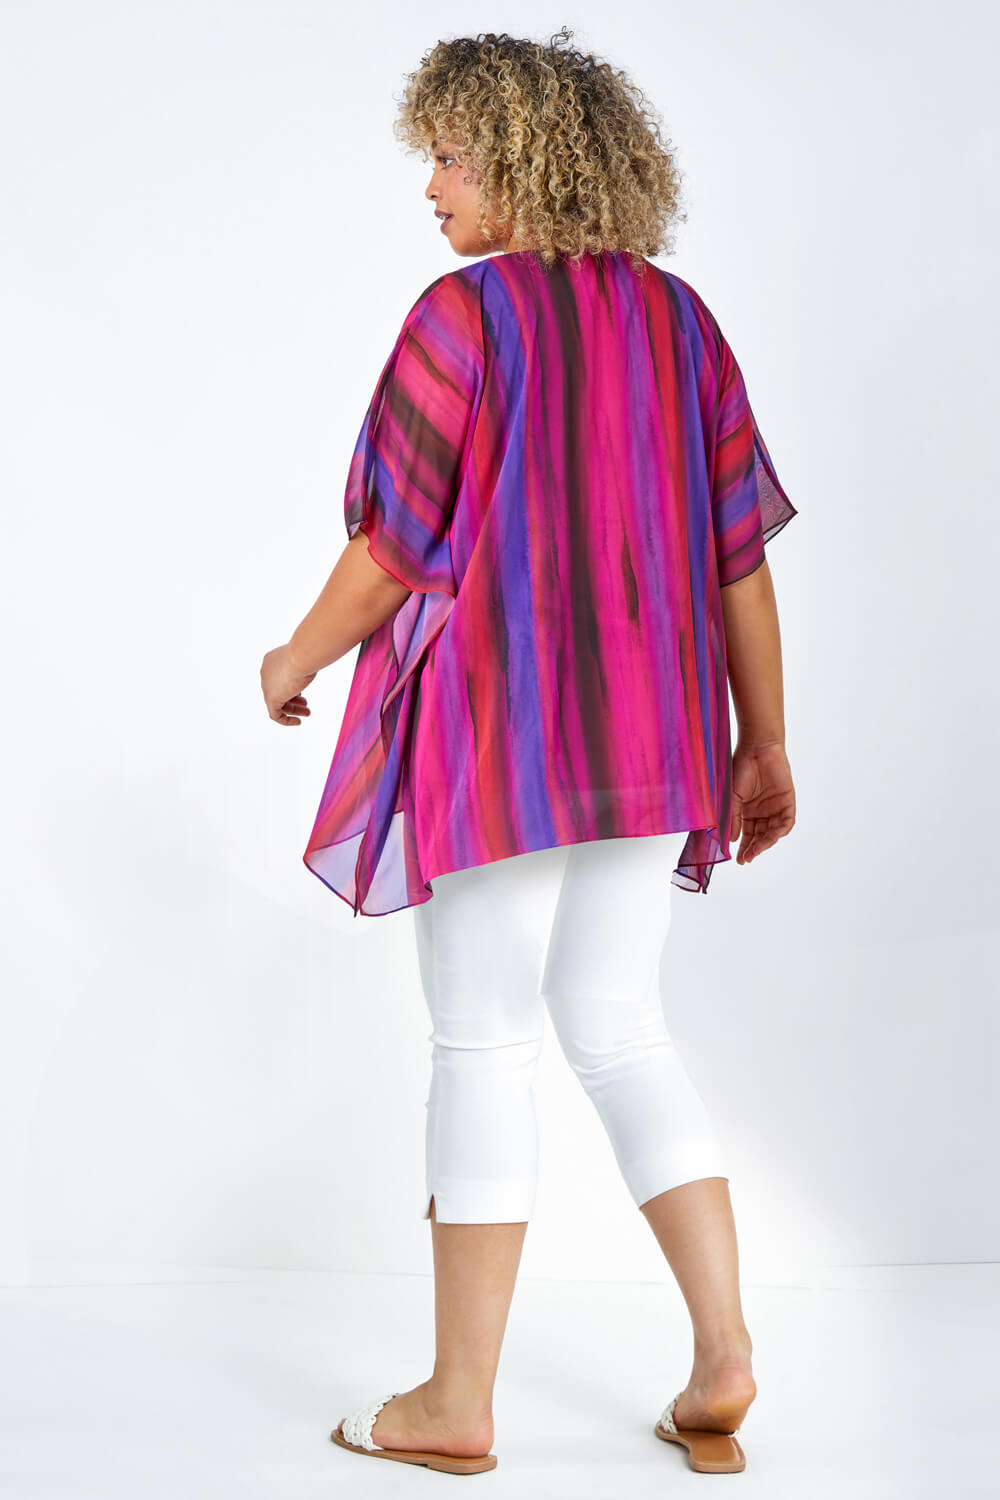 PINK Curve Stripe Chiffon Overlay Top, Image 3 of 5